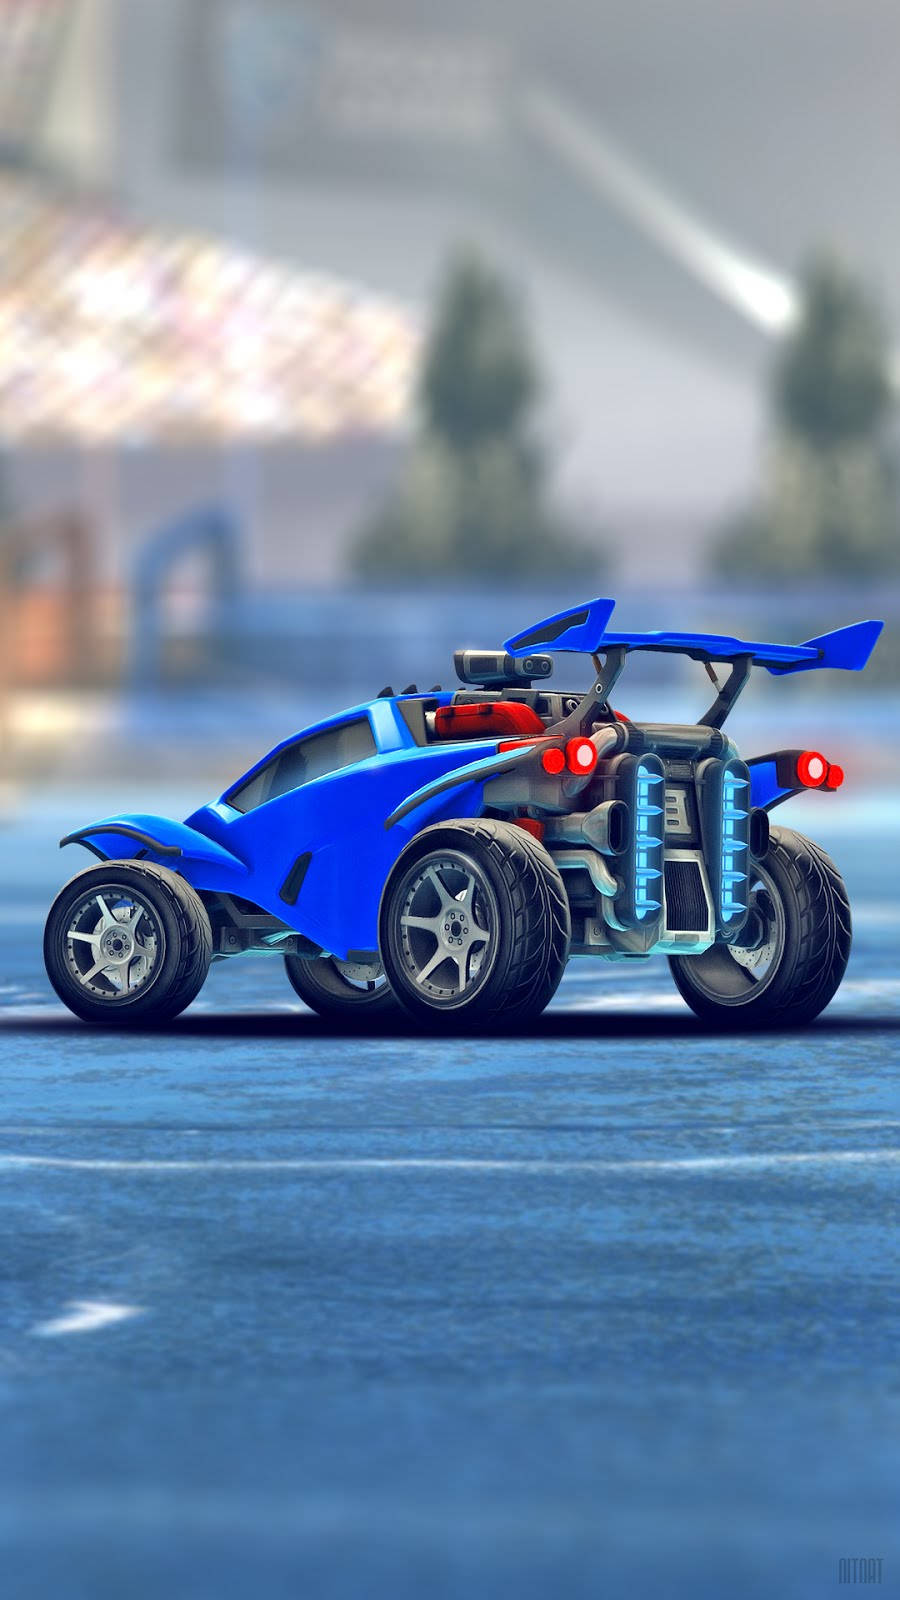 Get ready to compete with the legendary Rocket League Phone Wallpaper